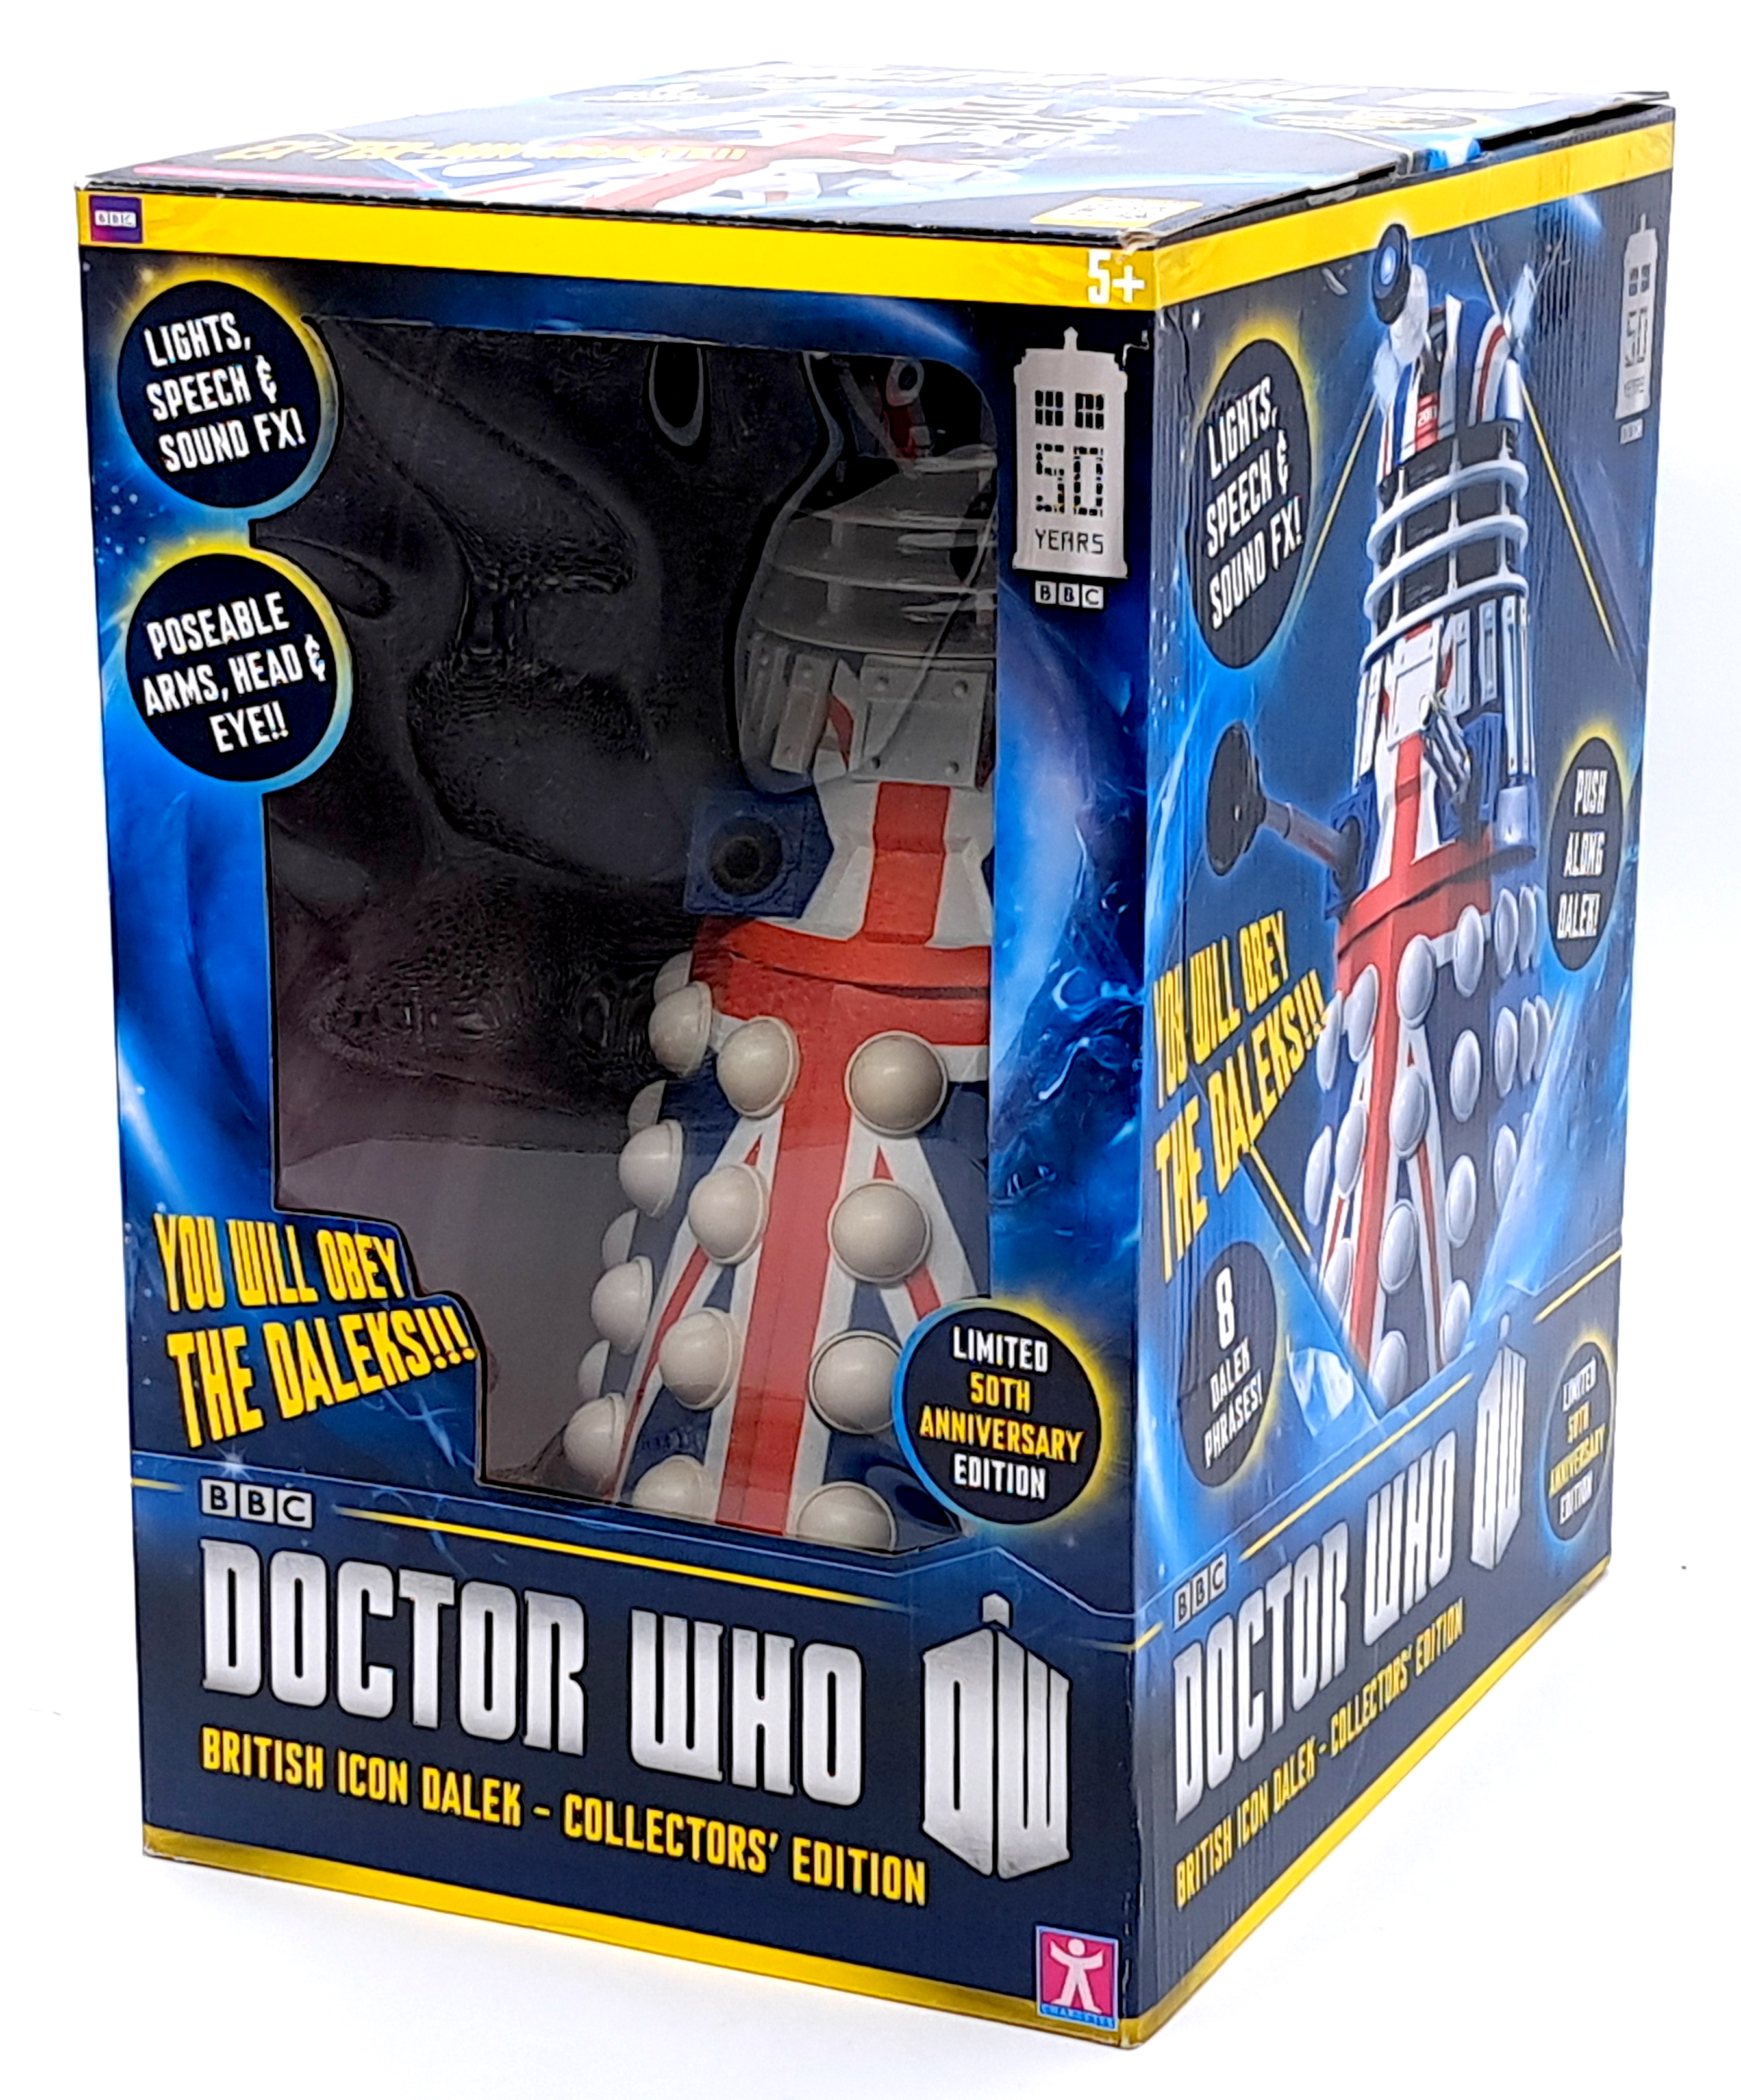 Character Doctor Who British Icon Dalek